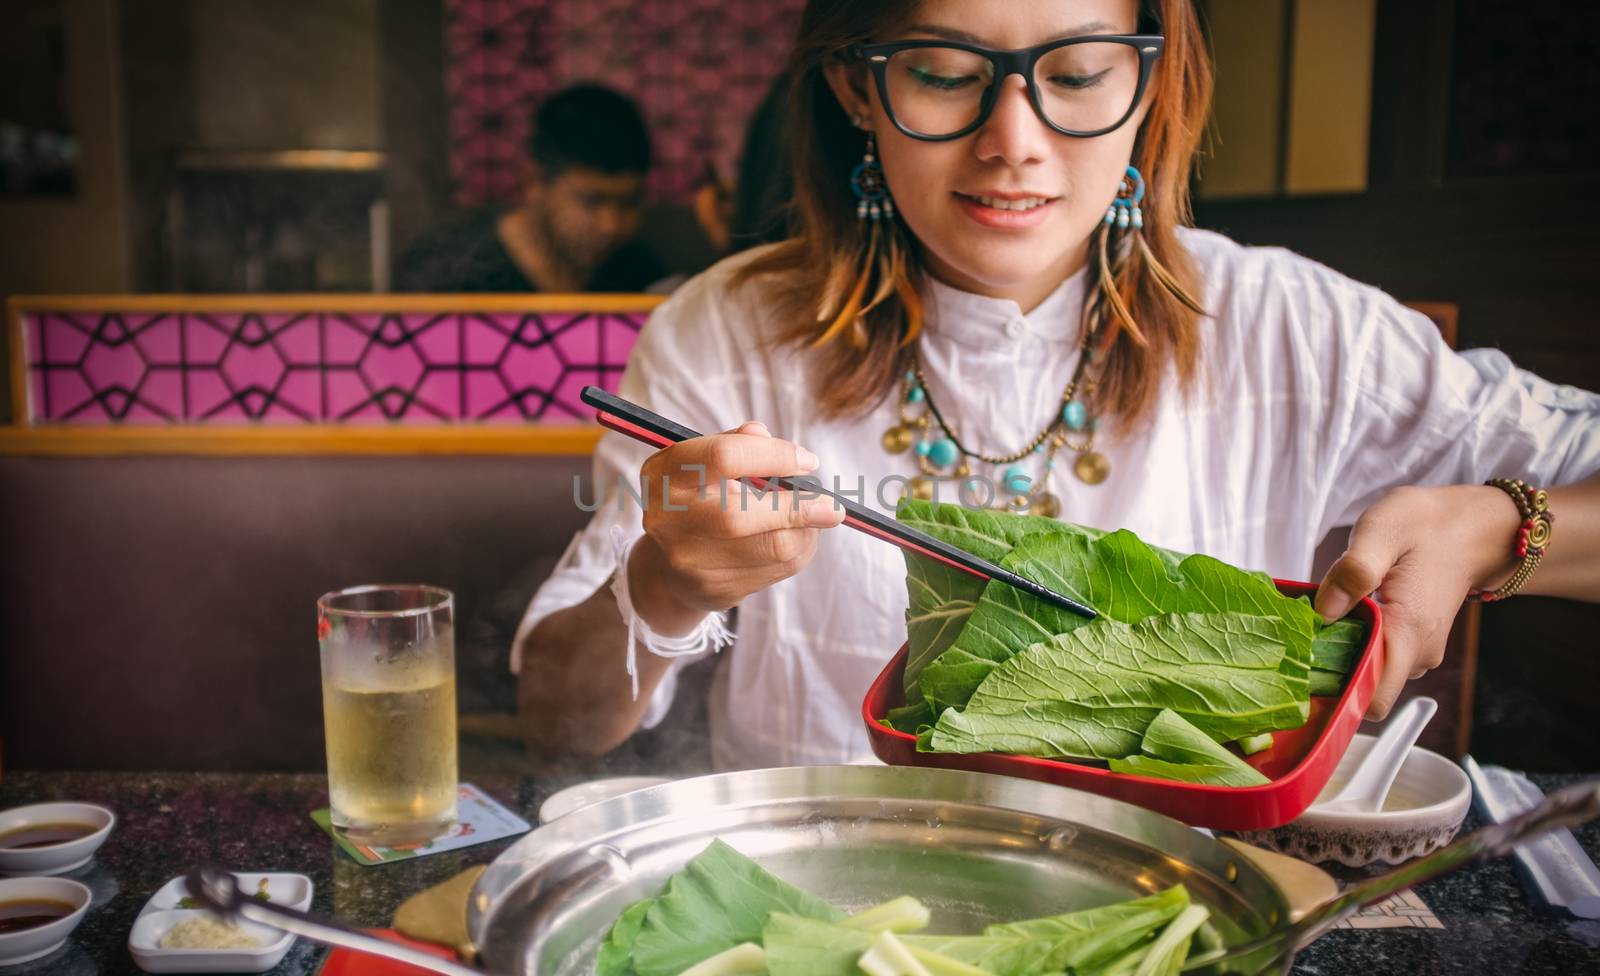 Asian women eating healthy vegetables happily. select Focus your chopsticks and vegetables